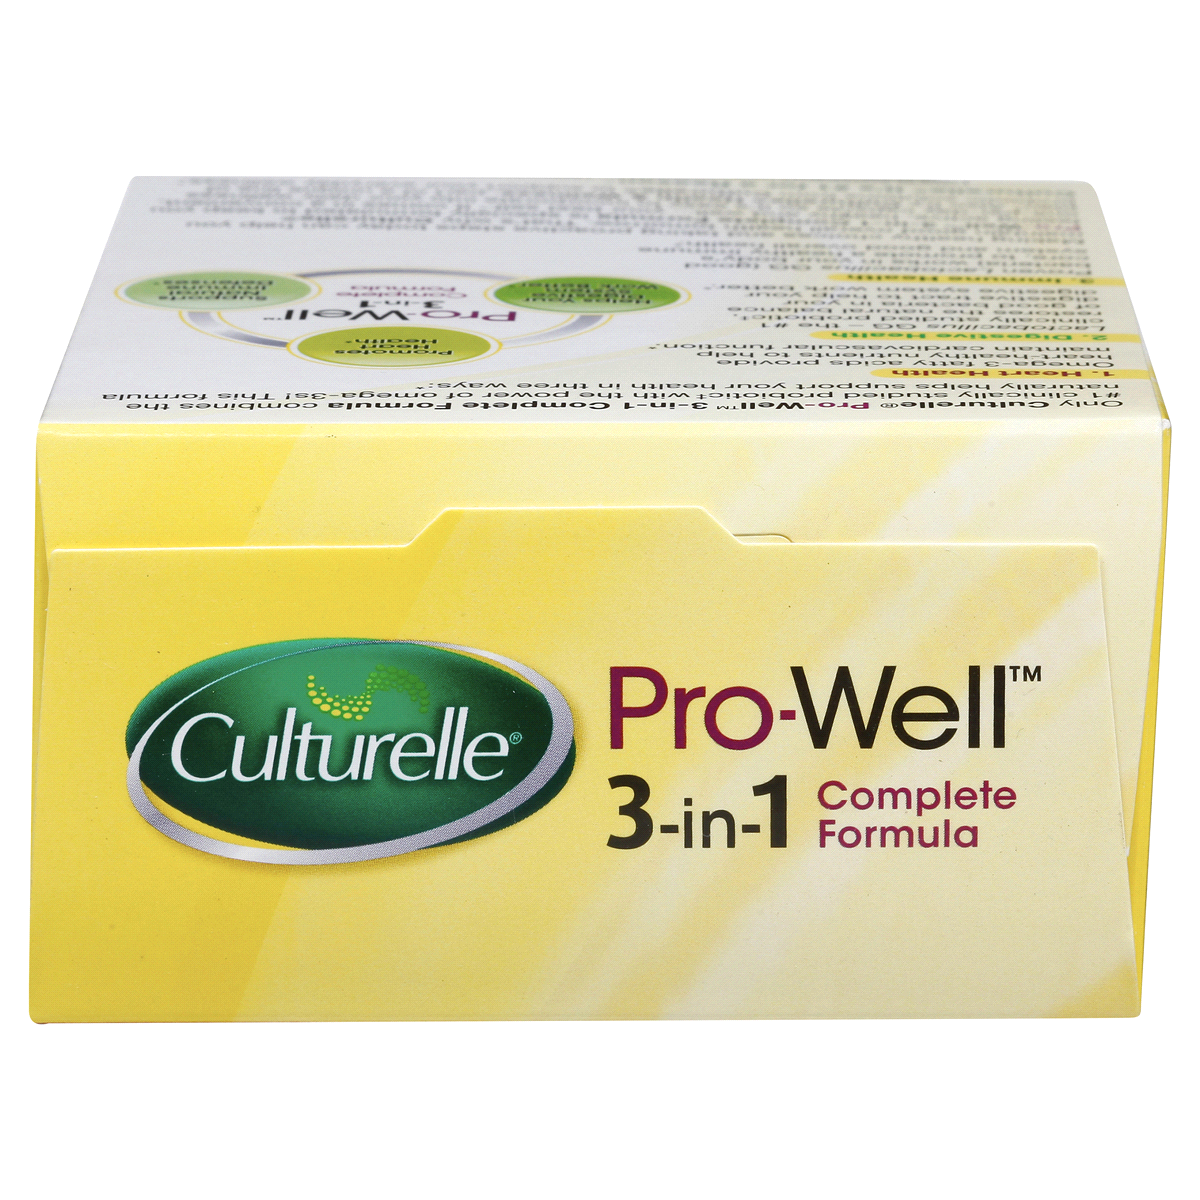 slide 8 of 11, Culturelle Prowell 3in1 Probiotic Complete Formula Dietary Supplement Capsules, 30 ct